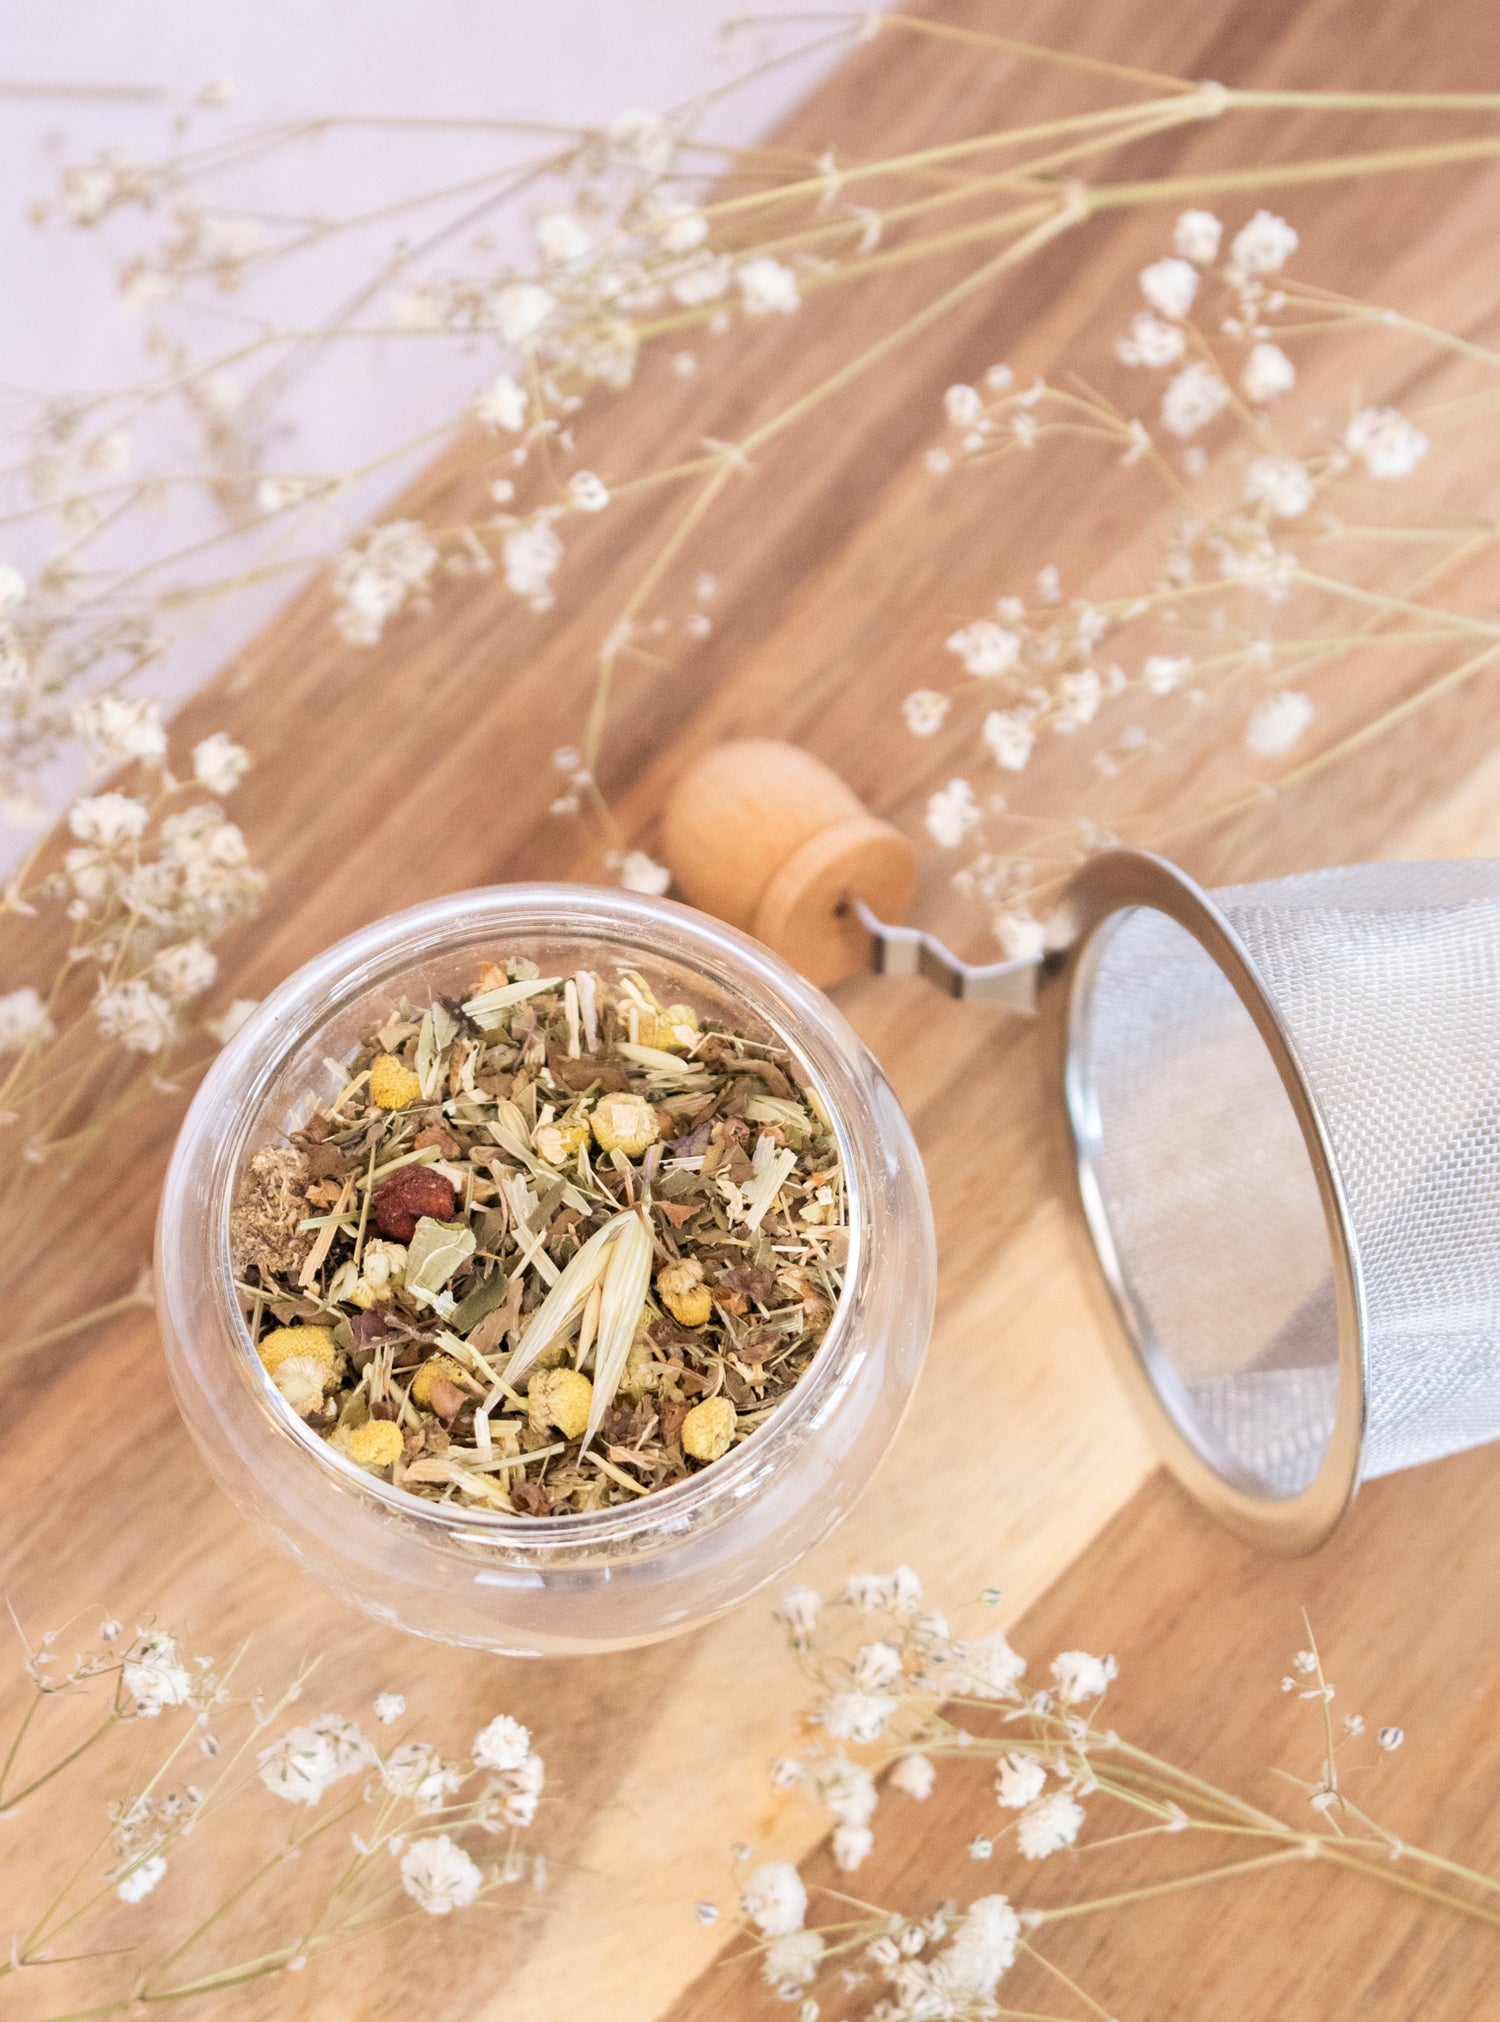 Our Inner Peace herbal tea blend is a natural remedy for stress and anxiety. Made with a blend of herbs known to calm the nervous system, this tea blend is sure to help you unwind and find some inner peace. 